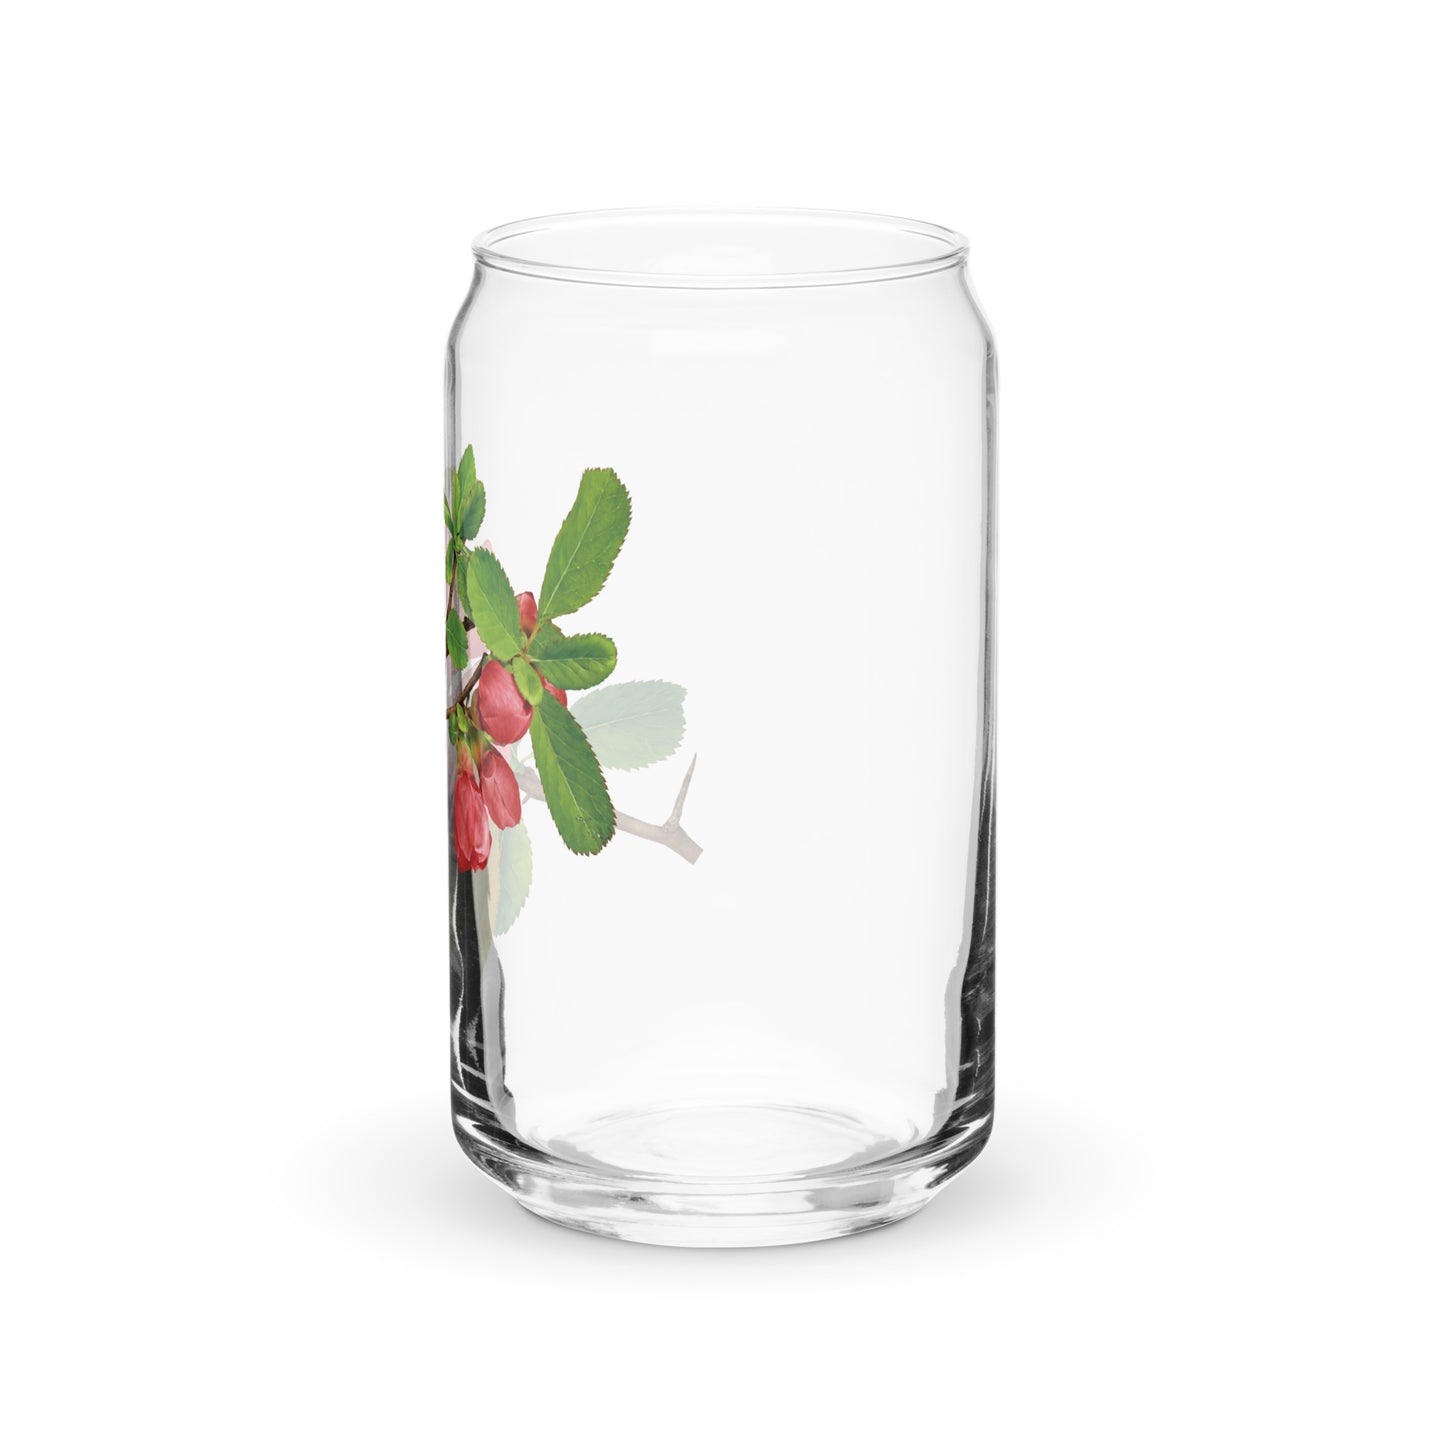 Chinese quince Can-shaped glass